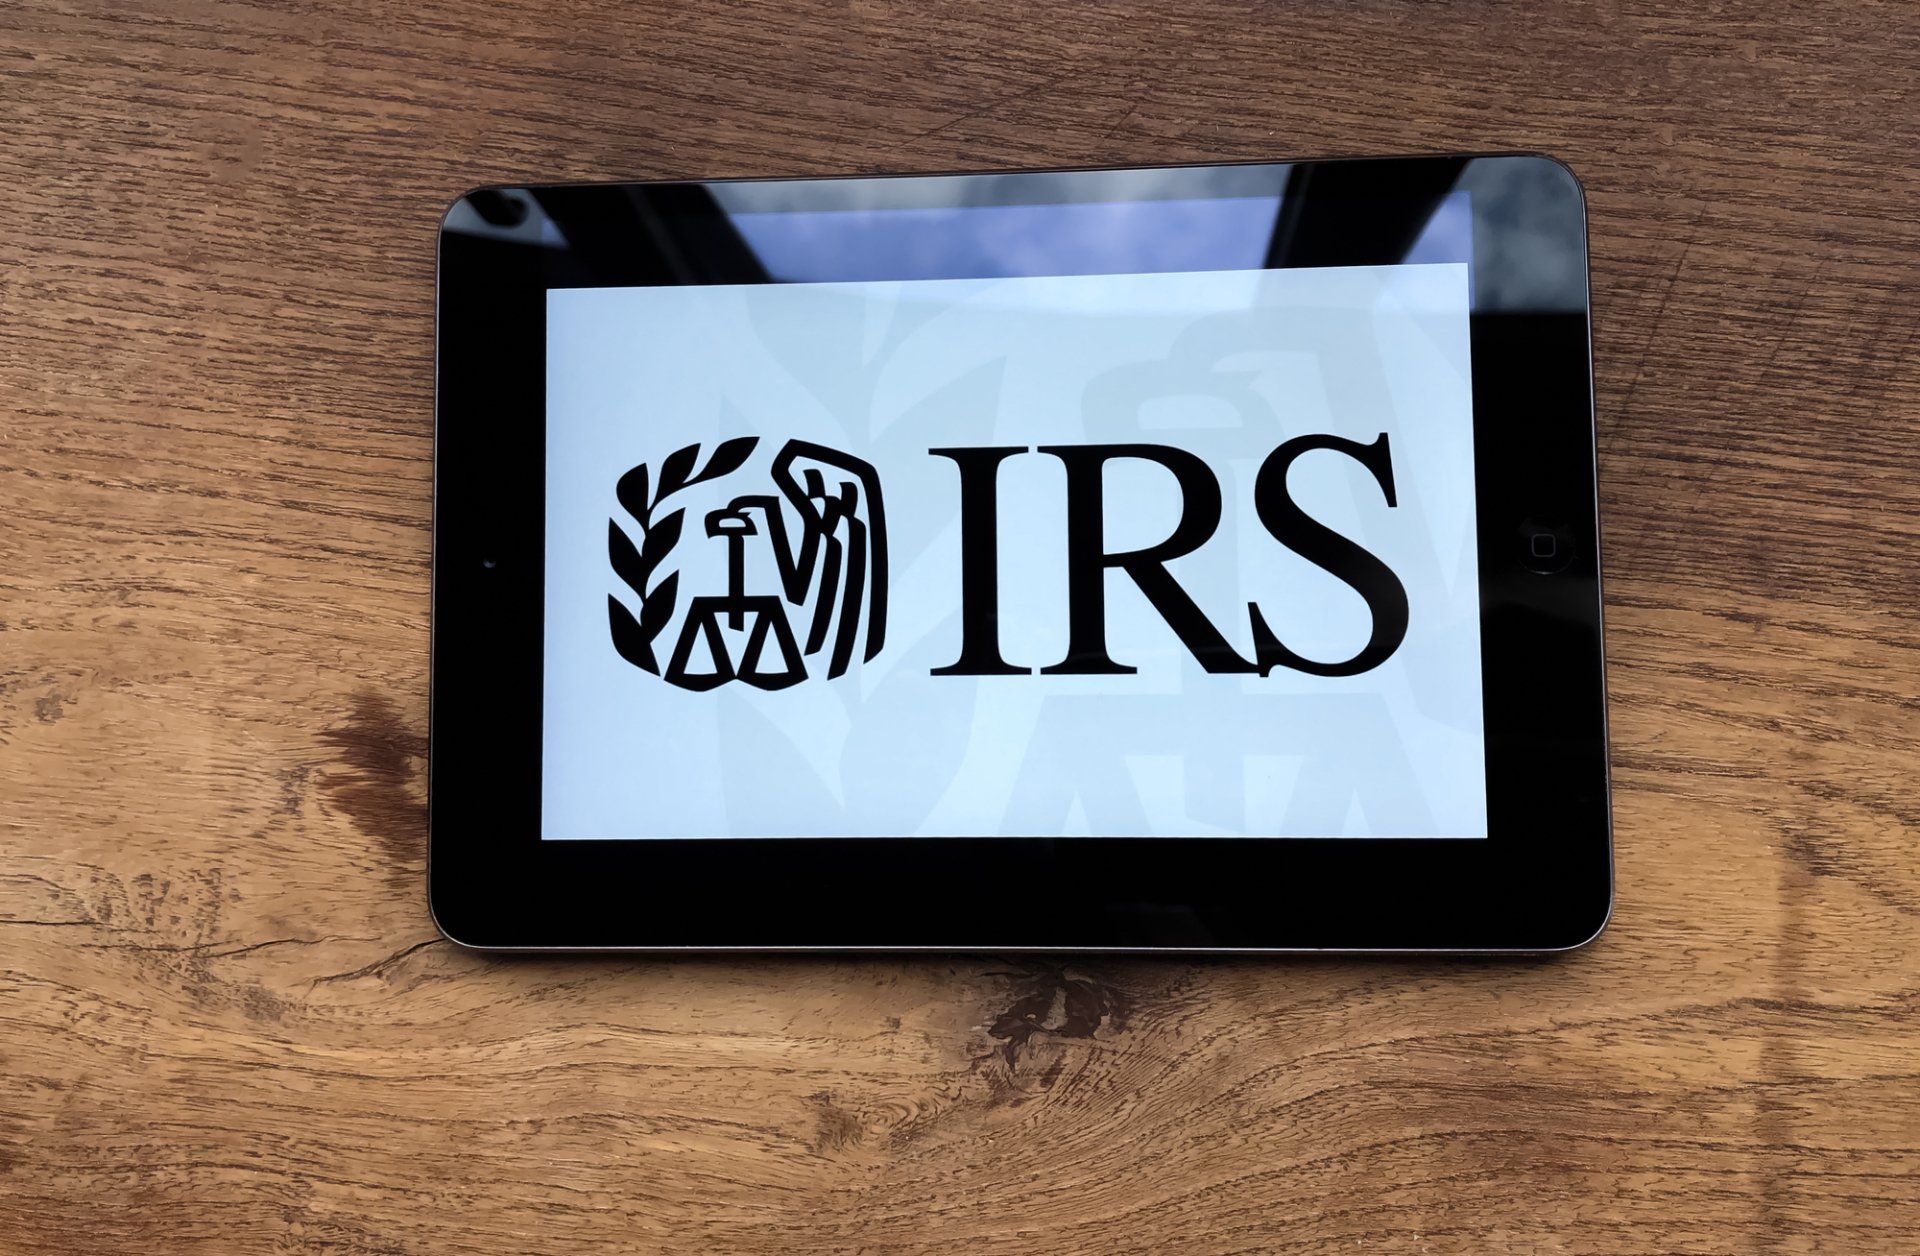 Ipad with IRS logo and 